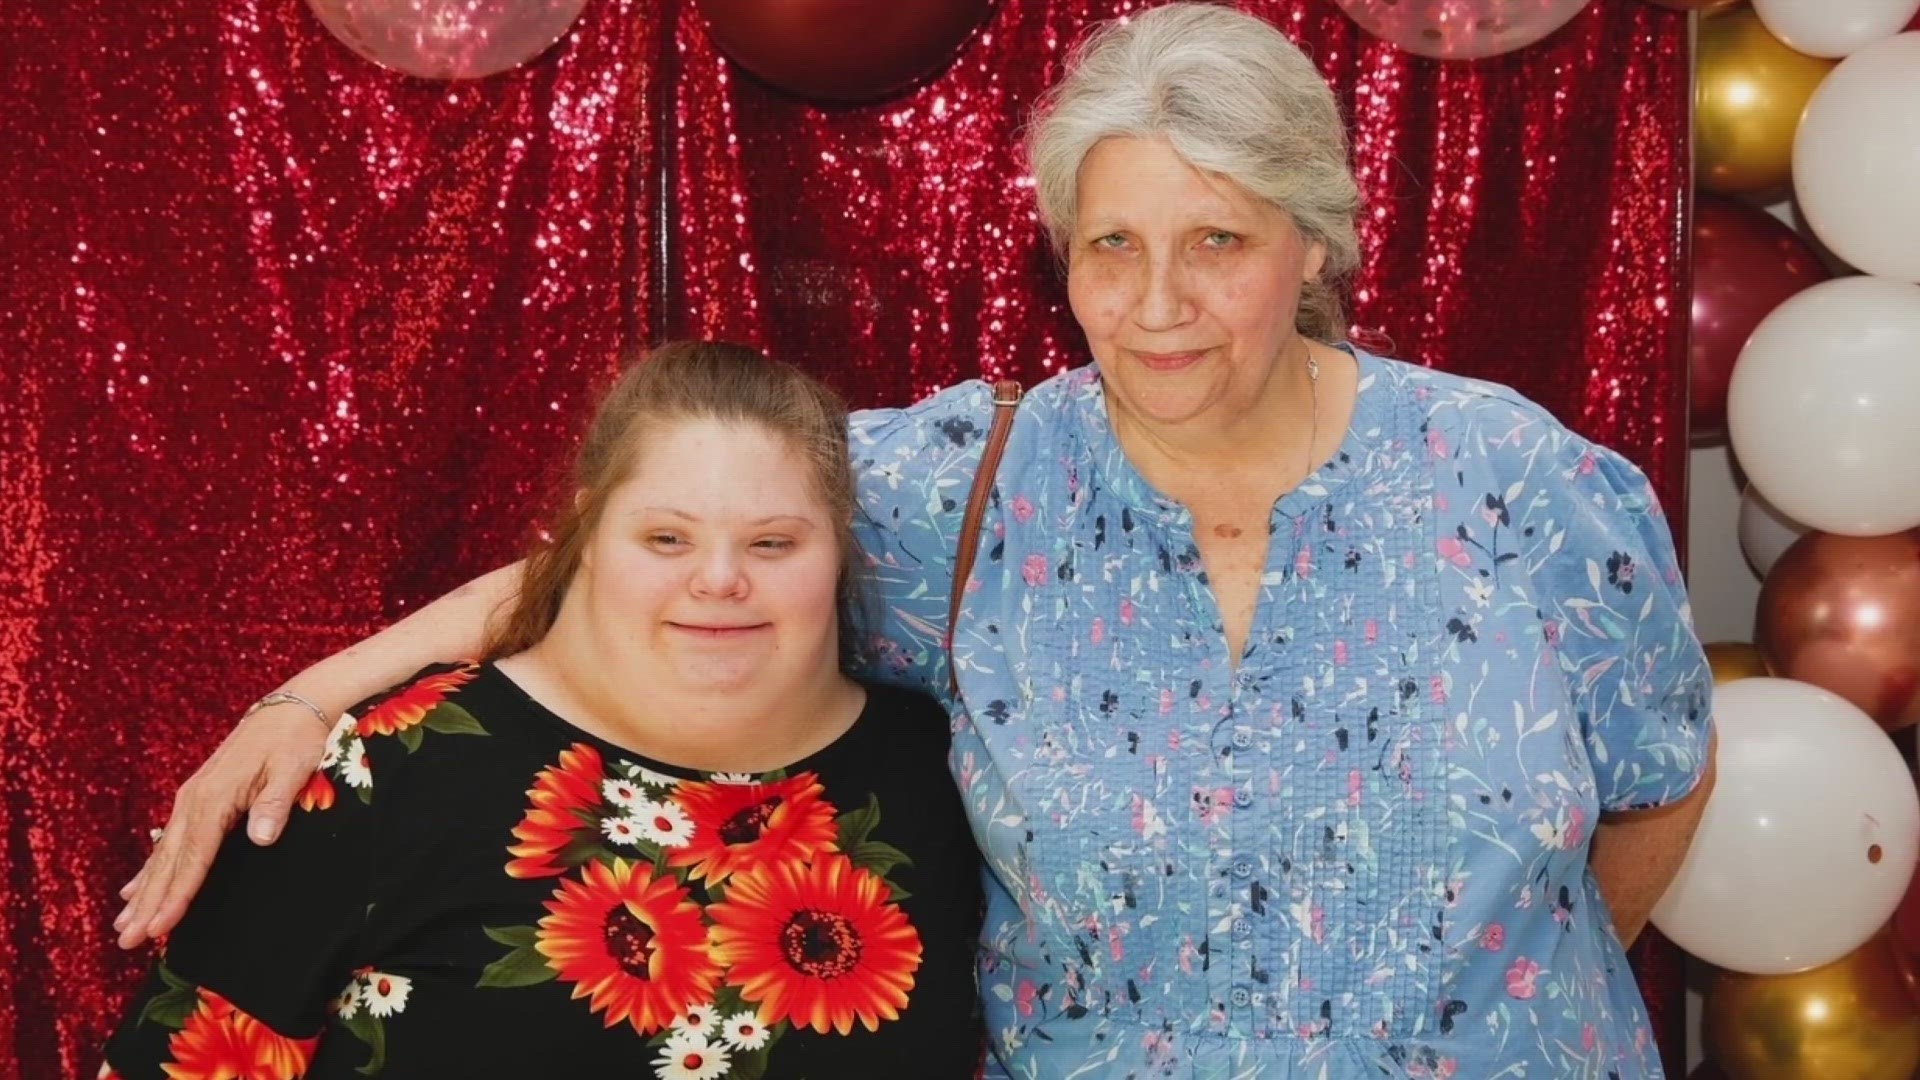 Betty Atwood’s husband died last year, and she takes care of her daughter who has special needs. Her other daughter surprised her with a "Little Wish."